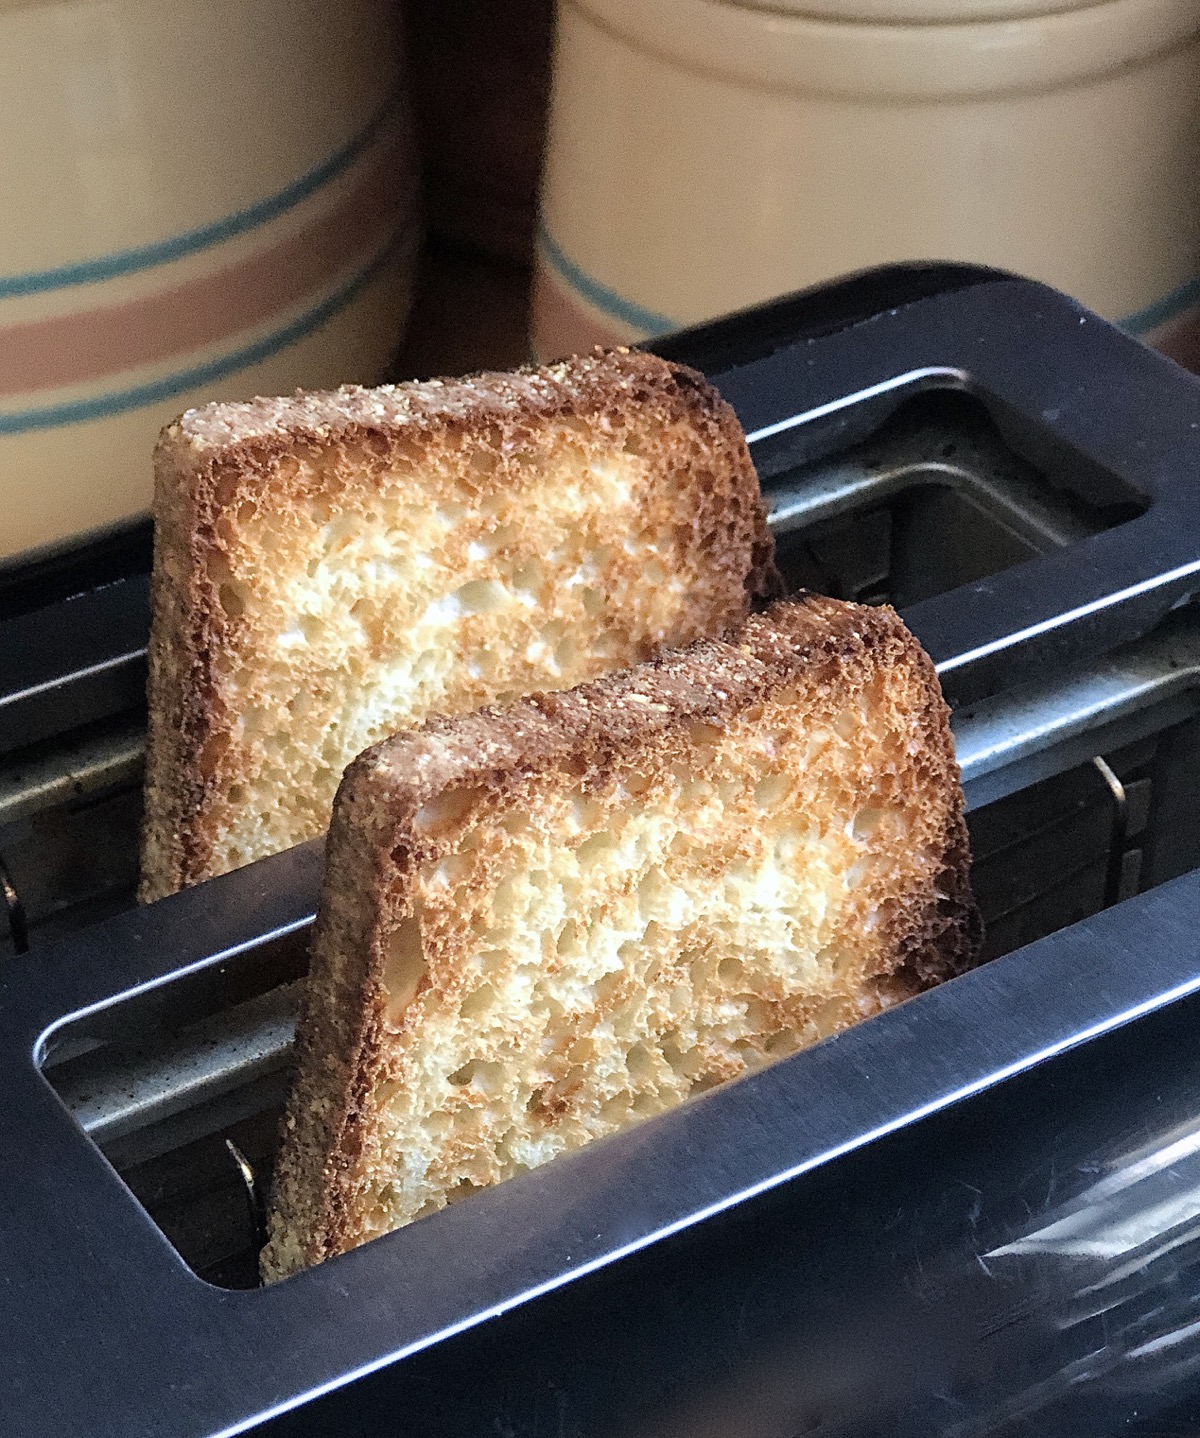 Two slices of toasted bread sitting in a toaster, freshly popped.